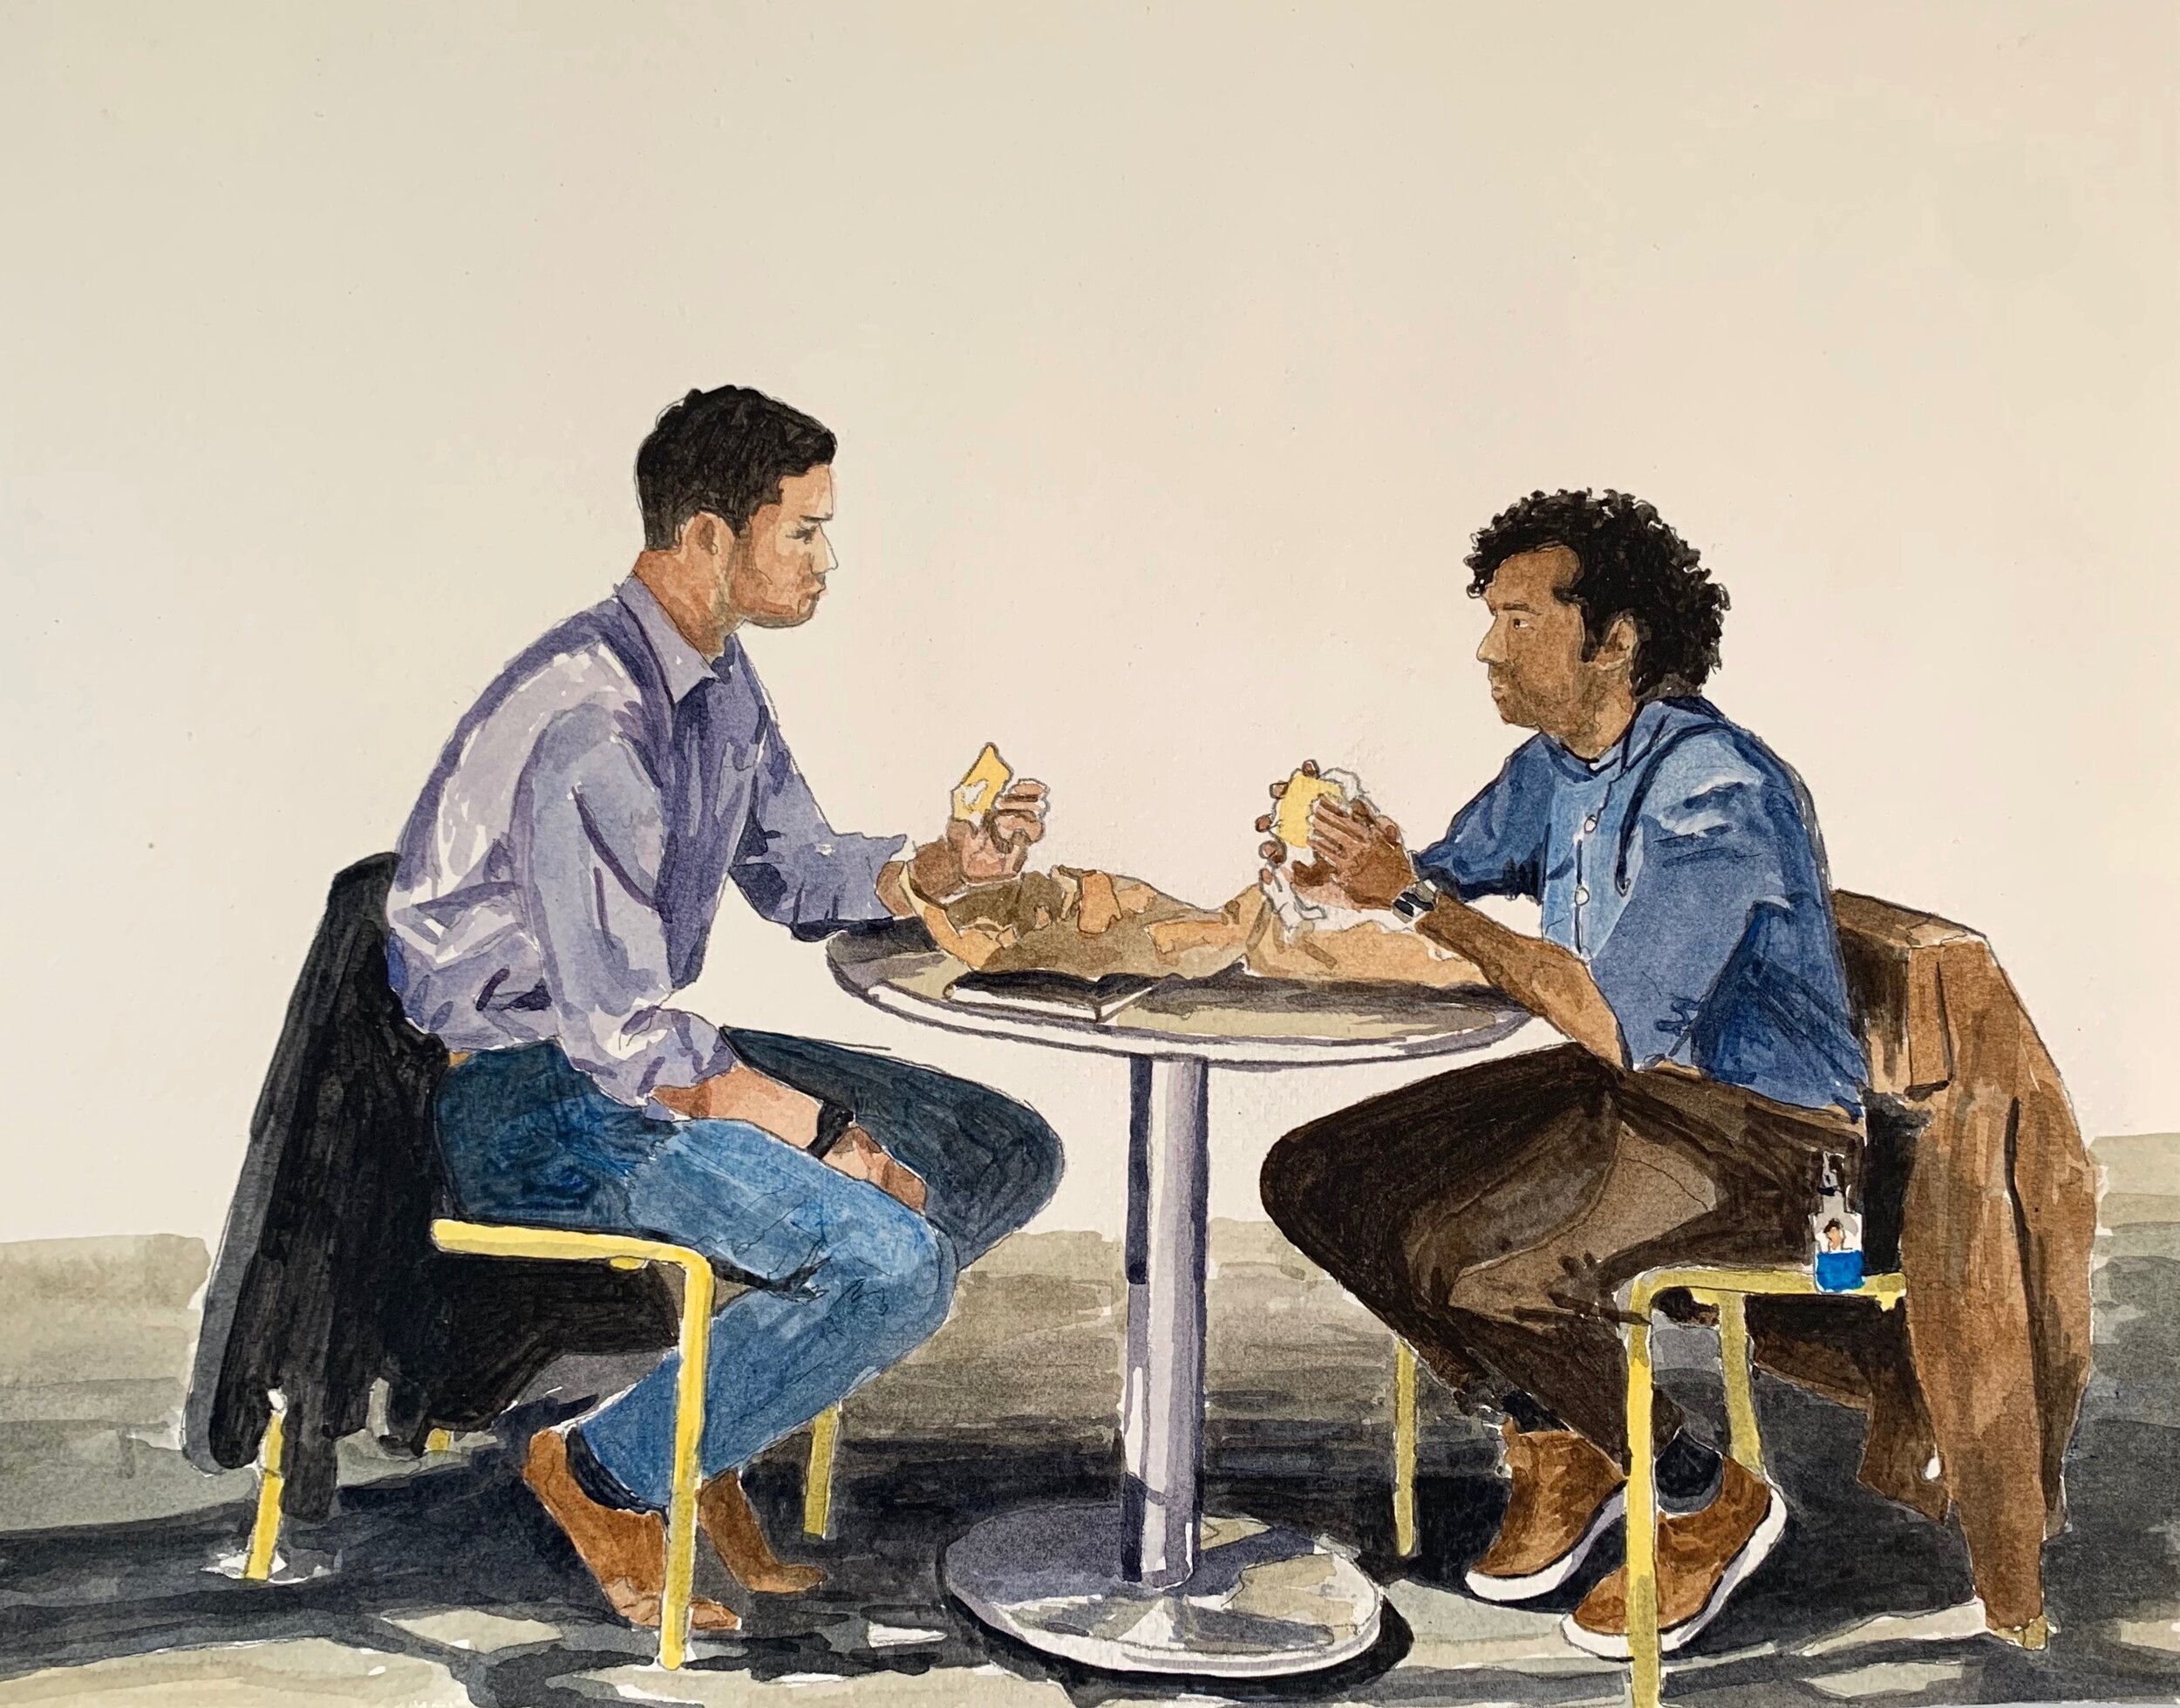 Untitled, Guys Eating Lunch, 2020